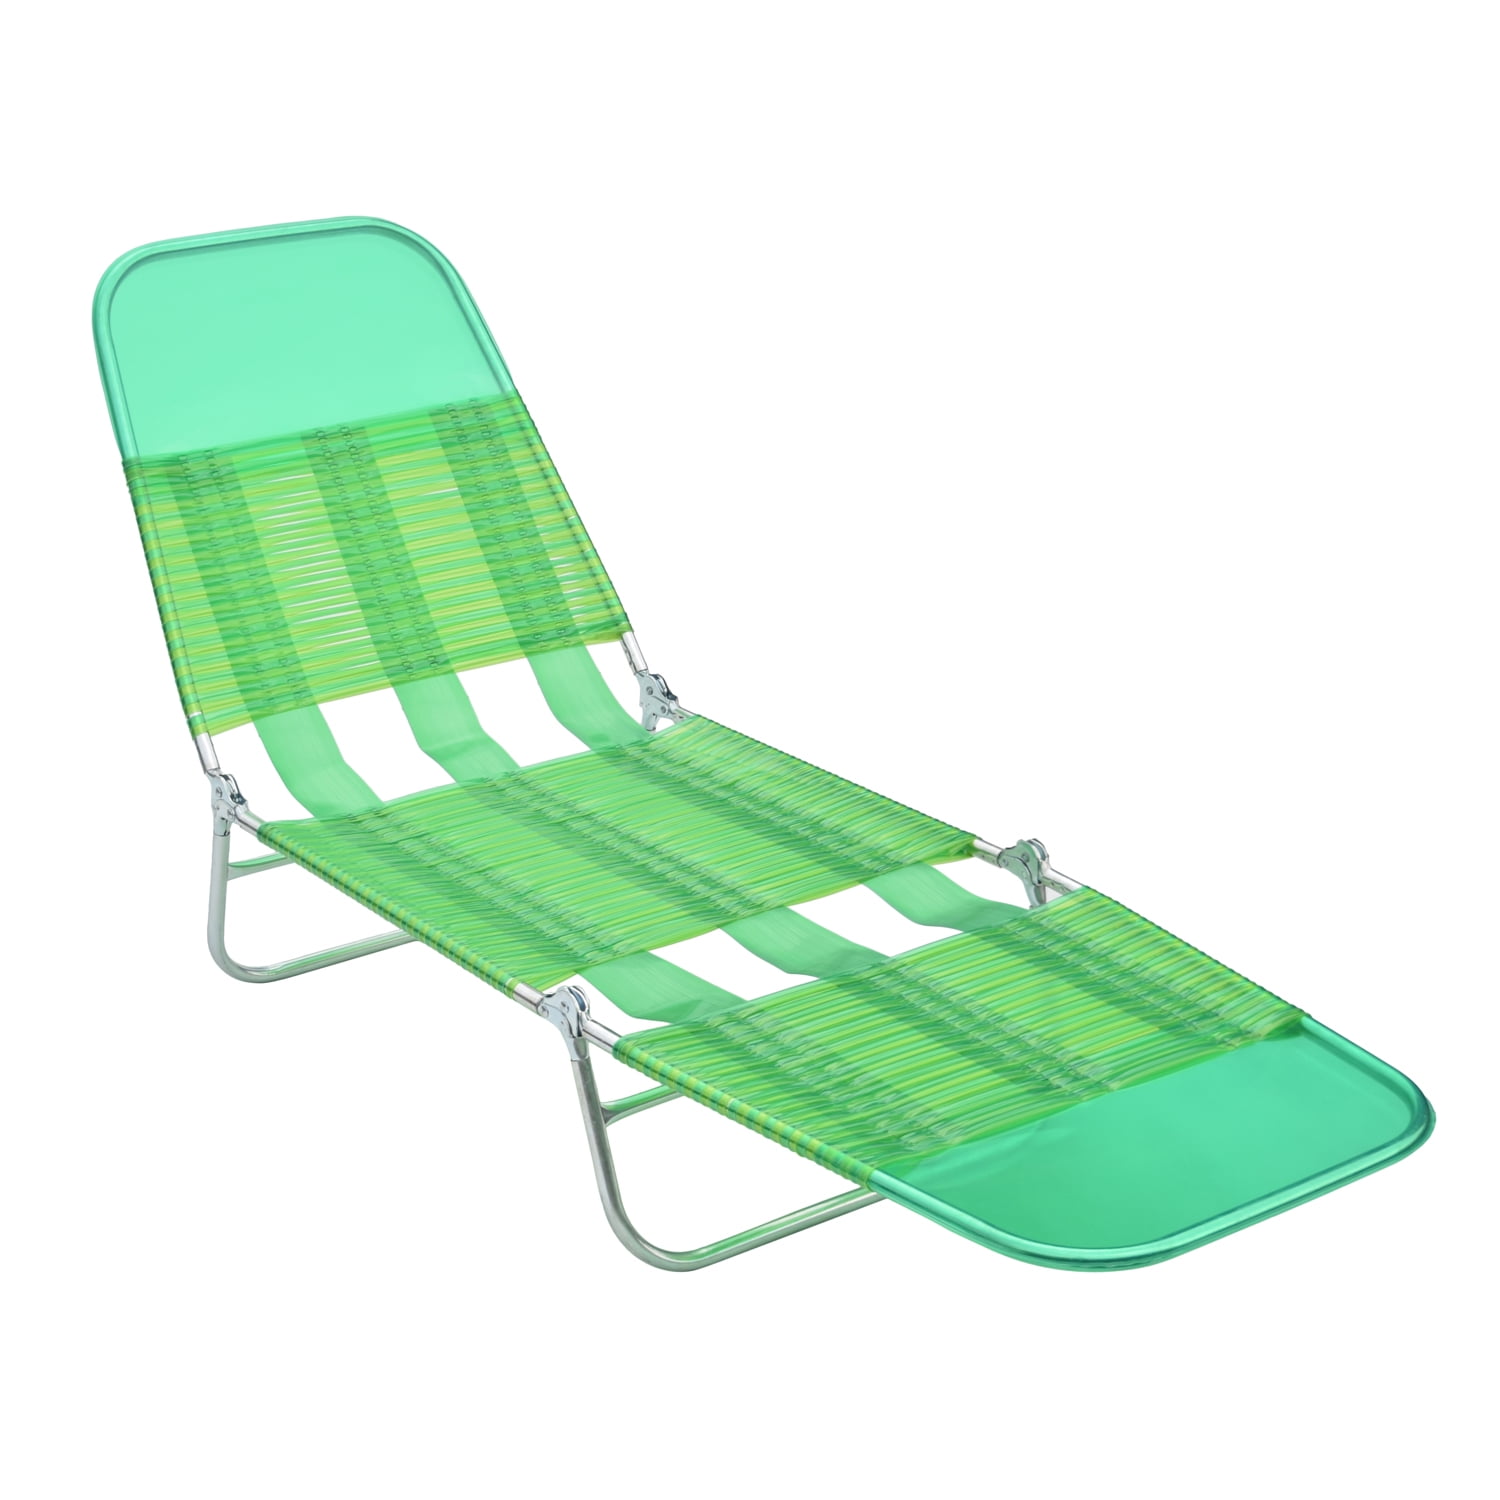 New Jelly Beach Chair for Living room